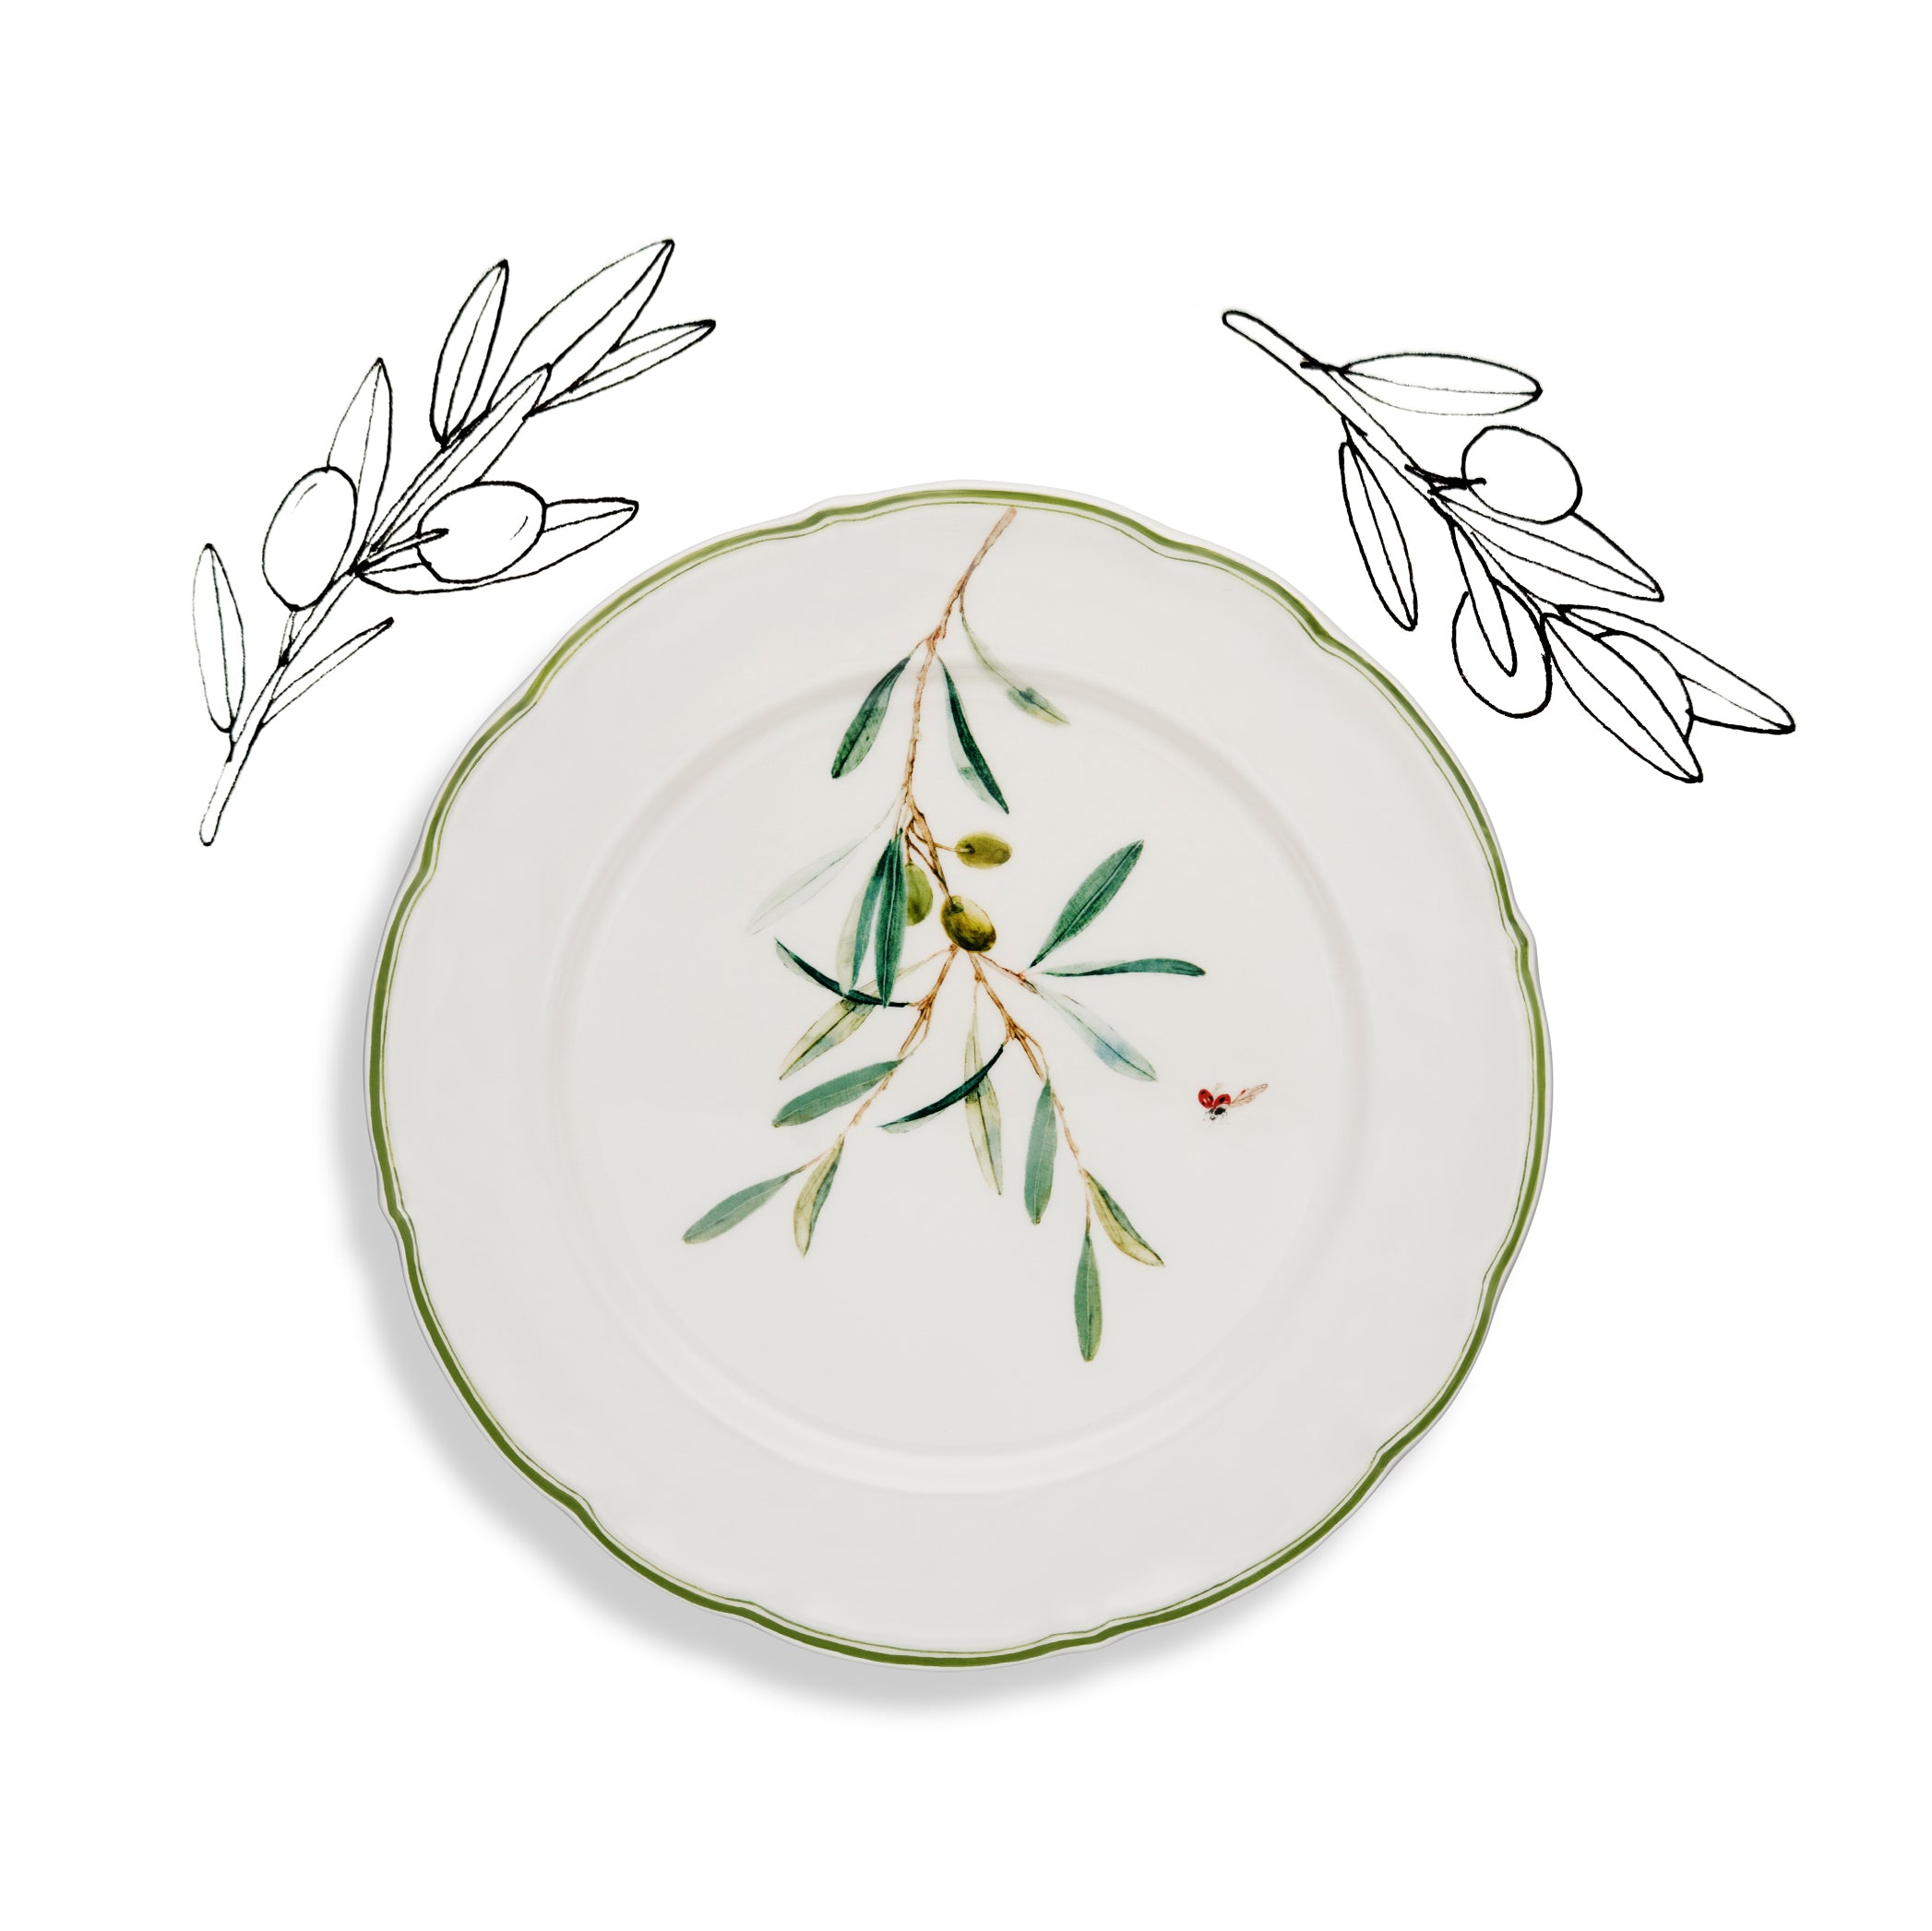 Olive Branch Scalloped Dinner Plate With Ladybird, 26cm